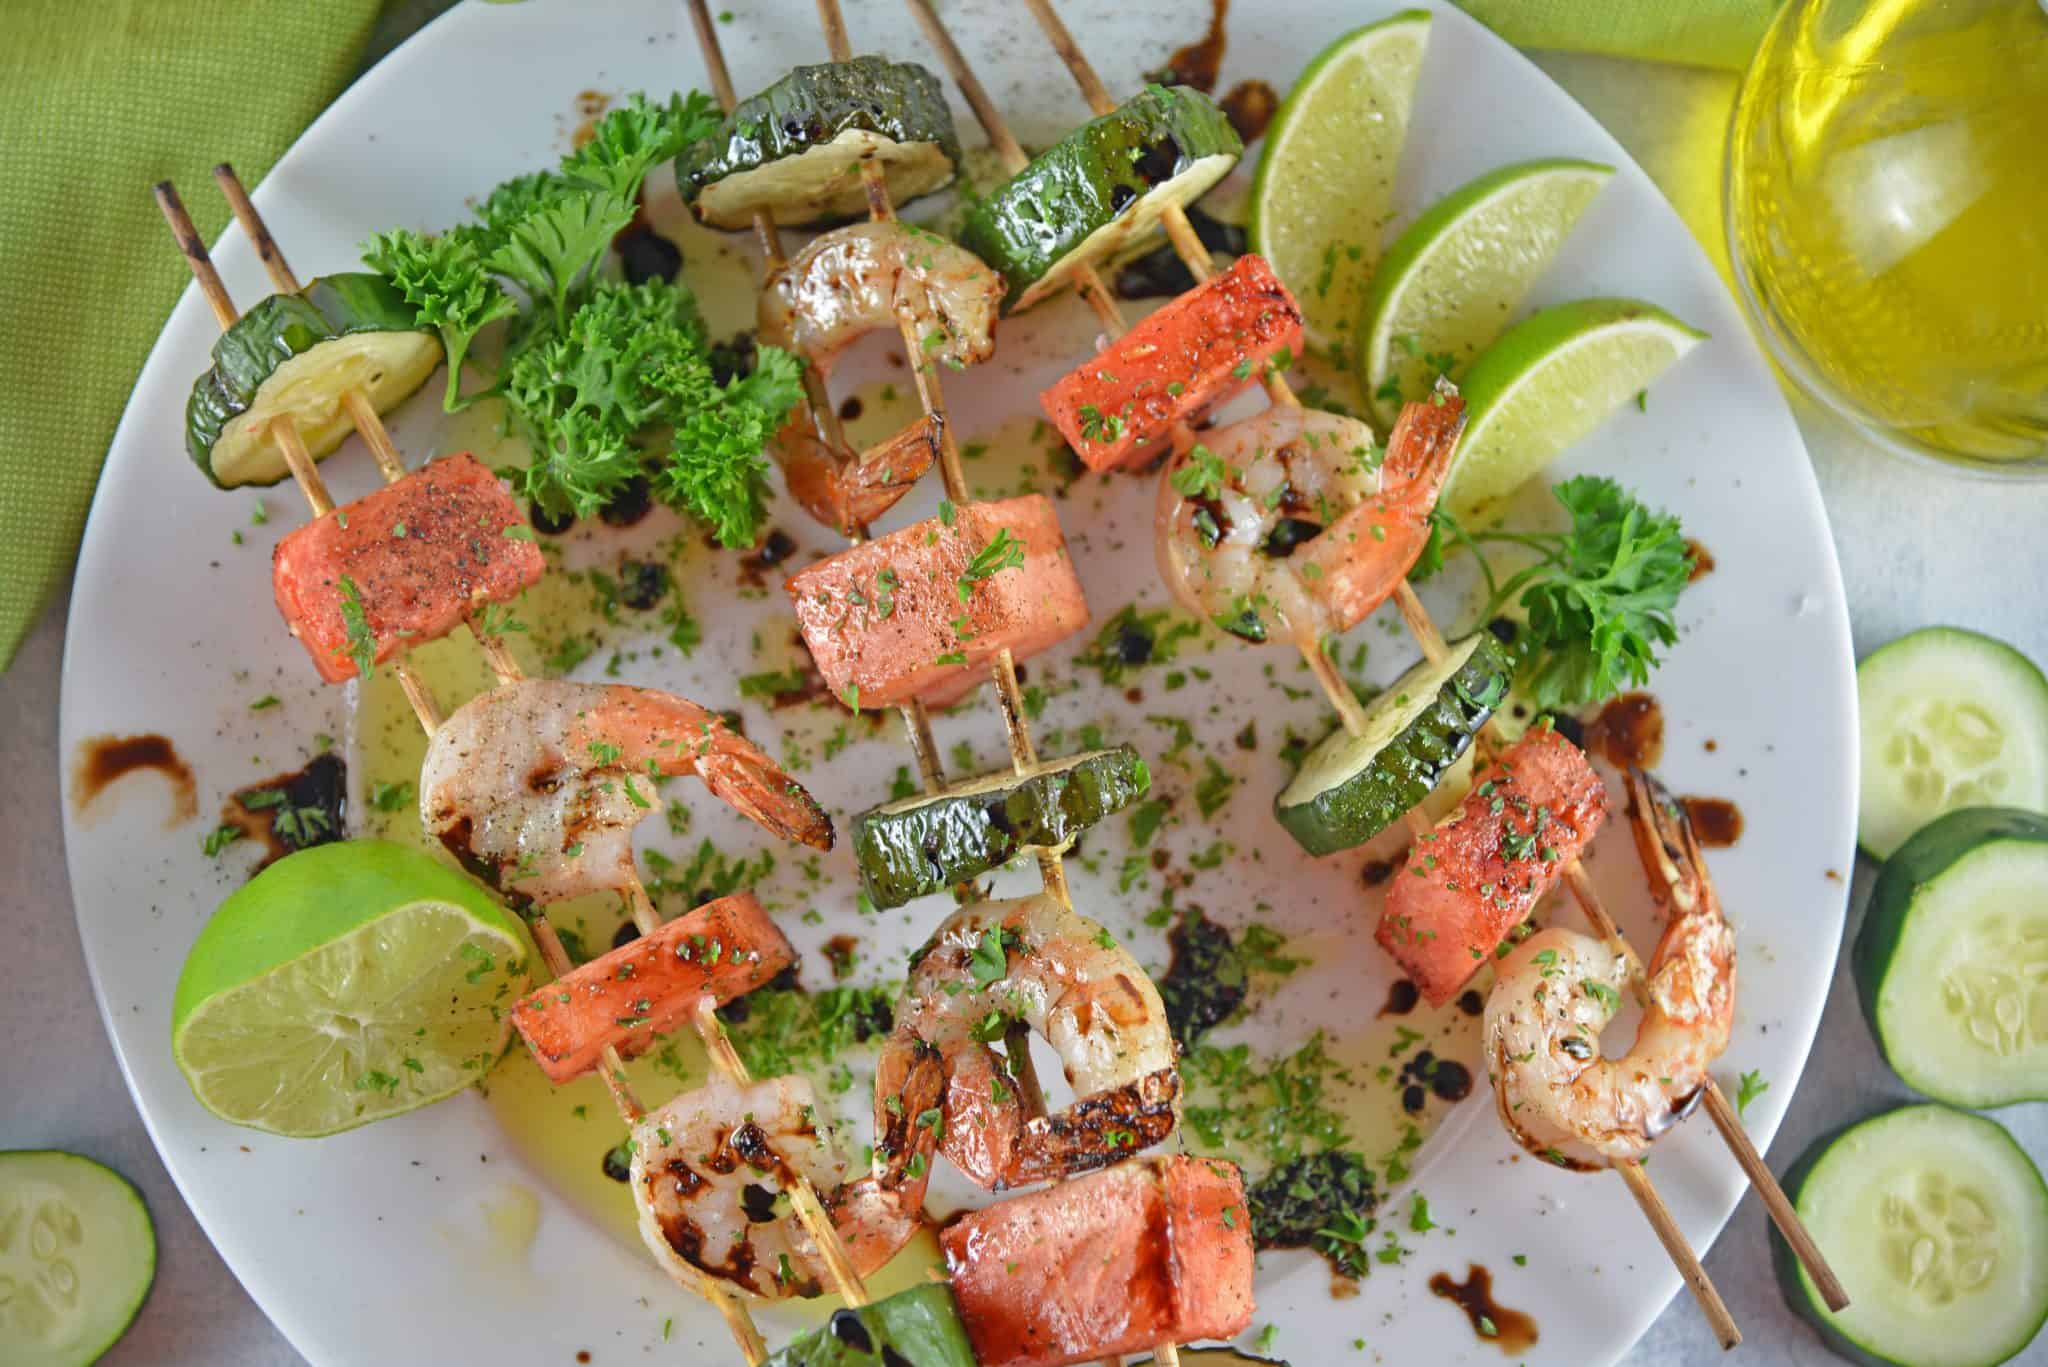 Watermelon Shrimp Kabobs combine grilled shrimp with grilled watermelon with a sweet balsamic reduction and zesty lime. A healthy kabob recipe on the grill.